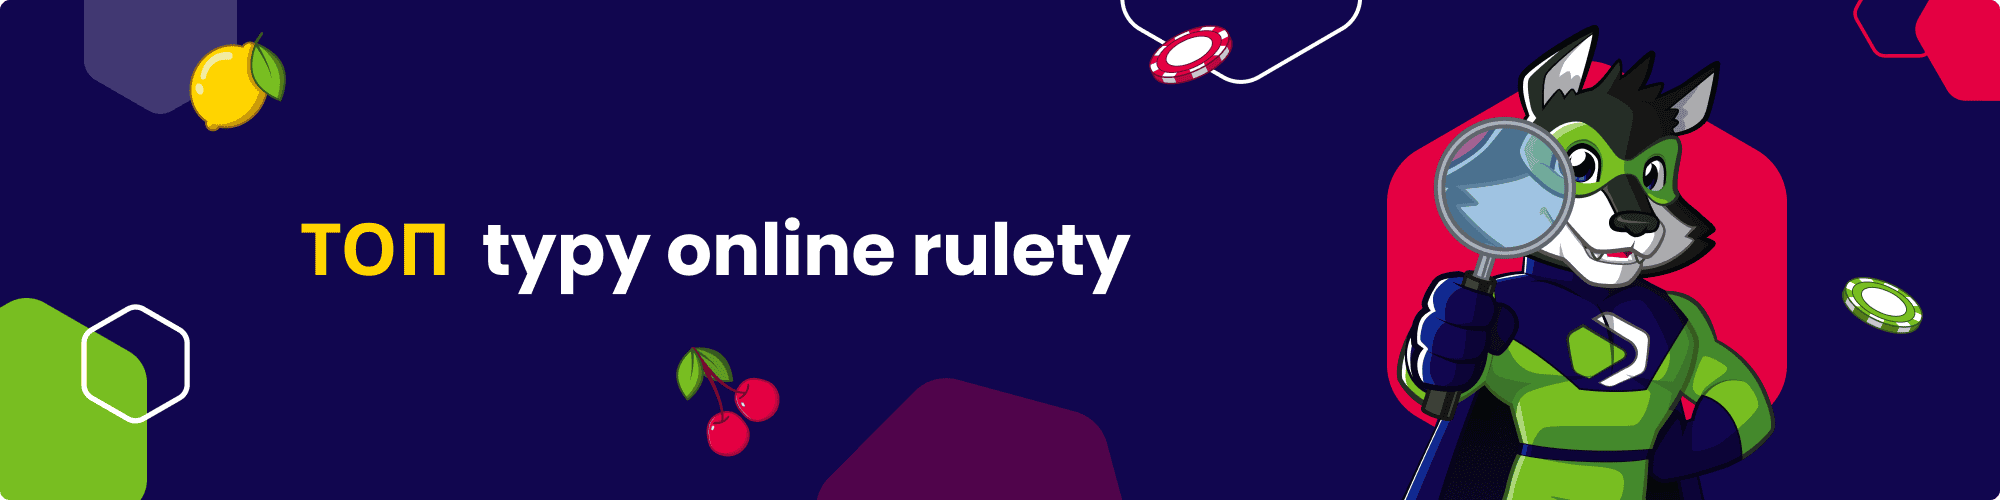 top typy online rulety- banner